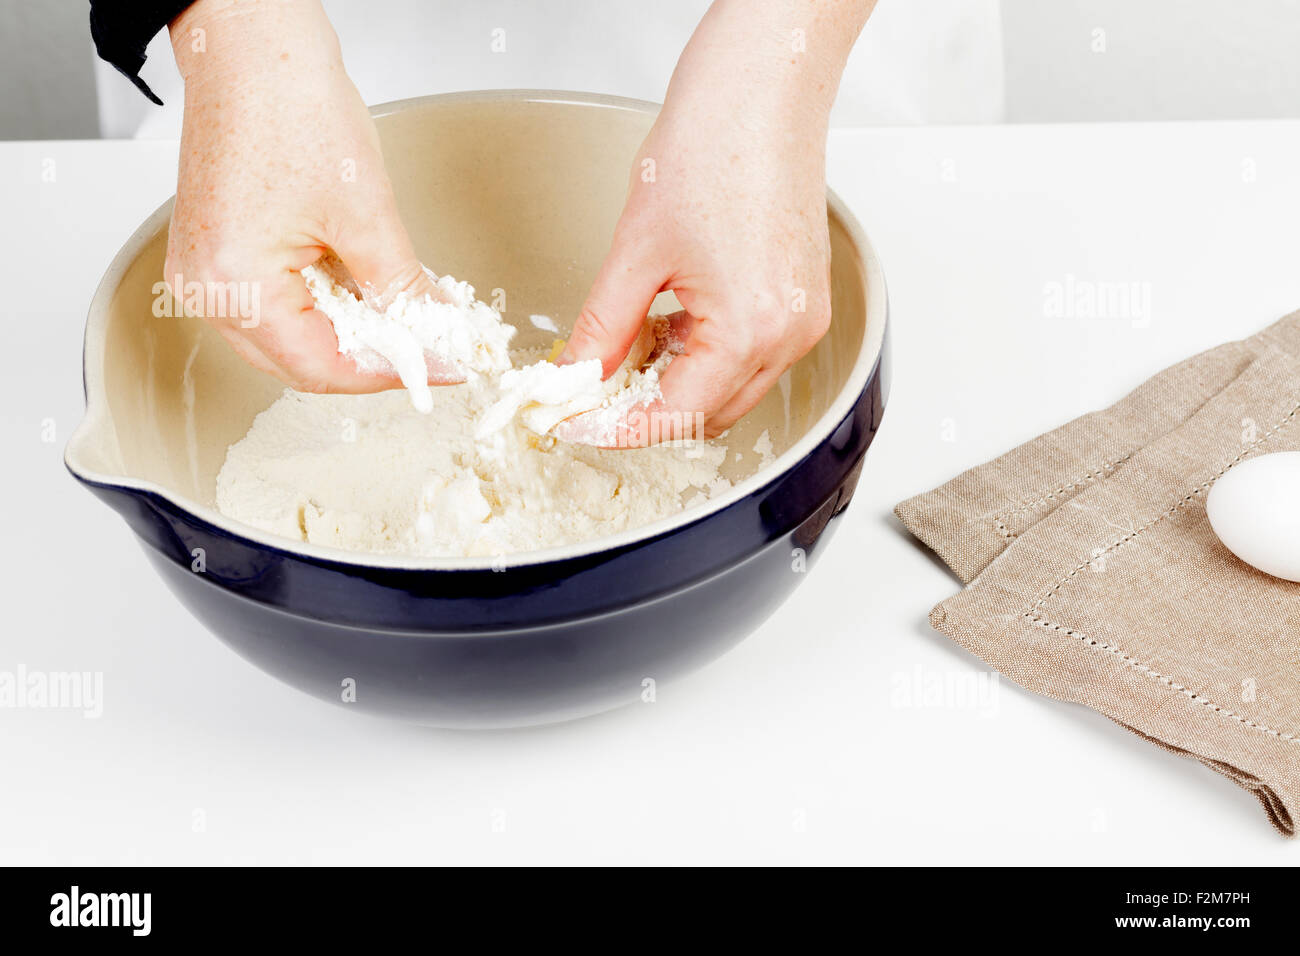 hands rubbing butter into flour Stock Photo